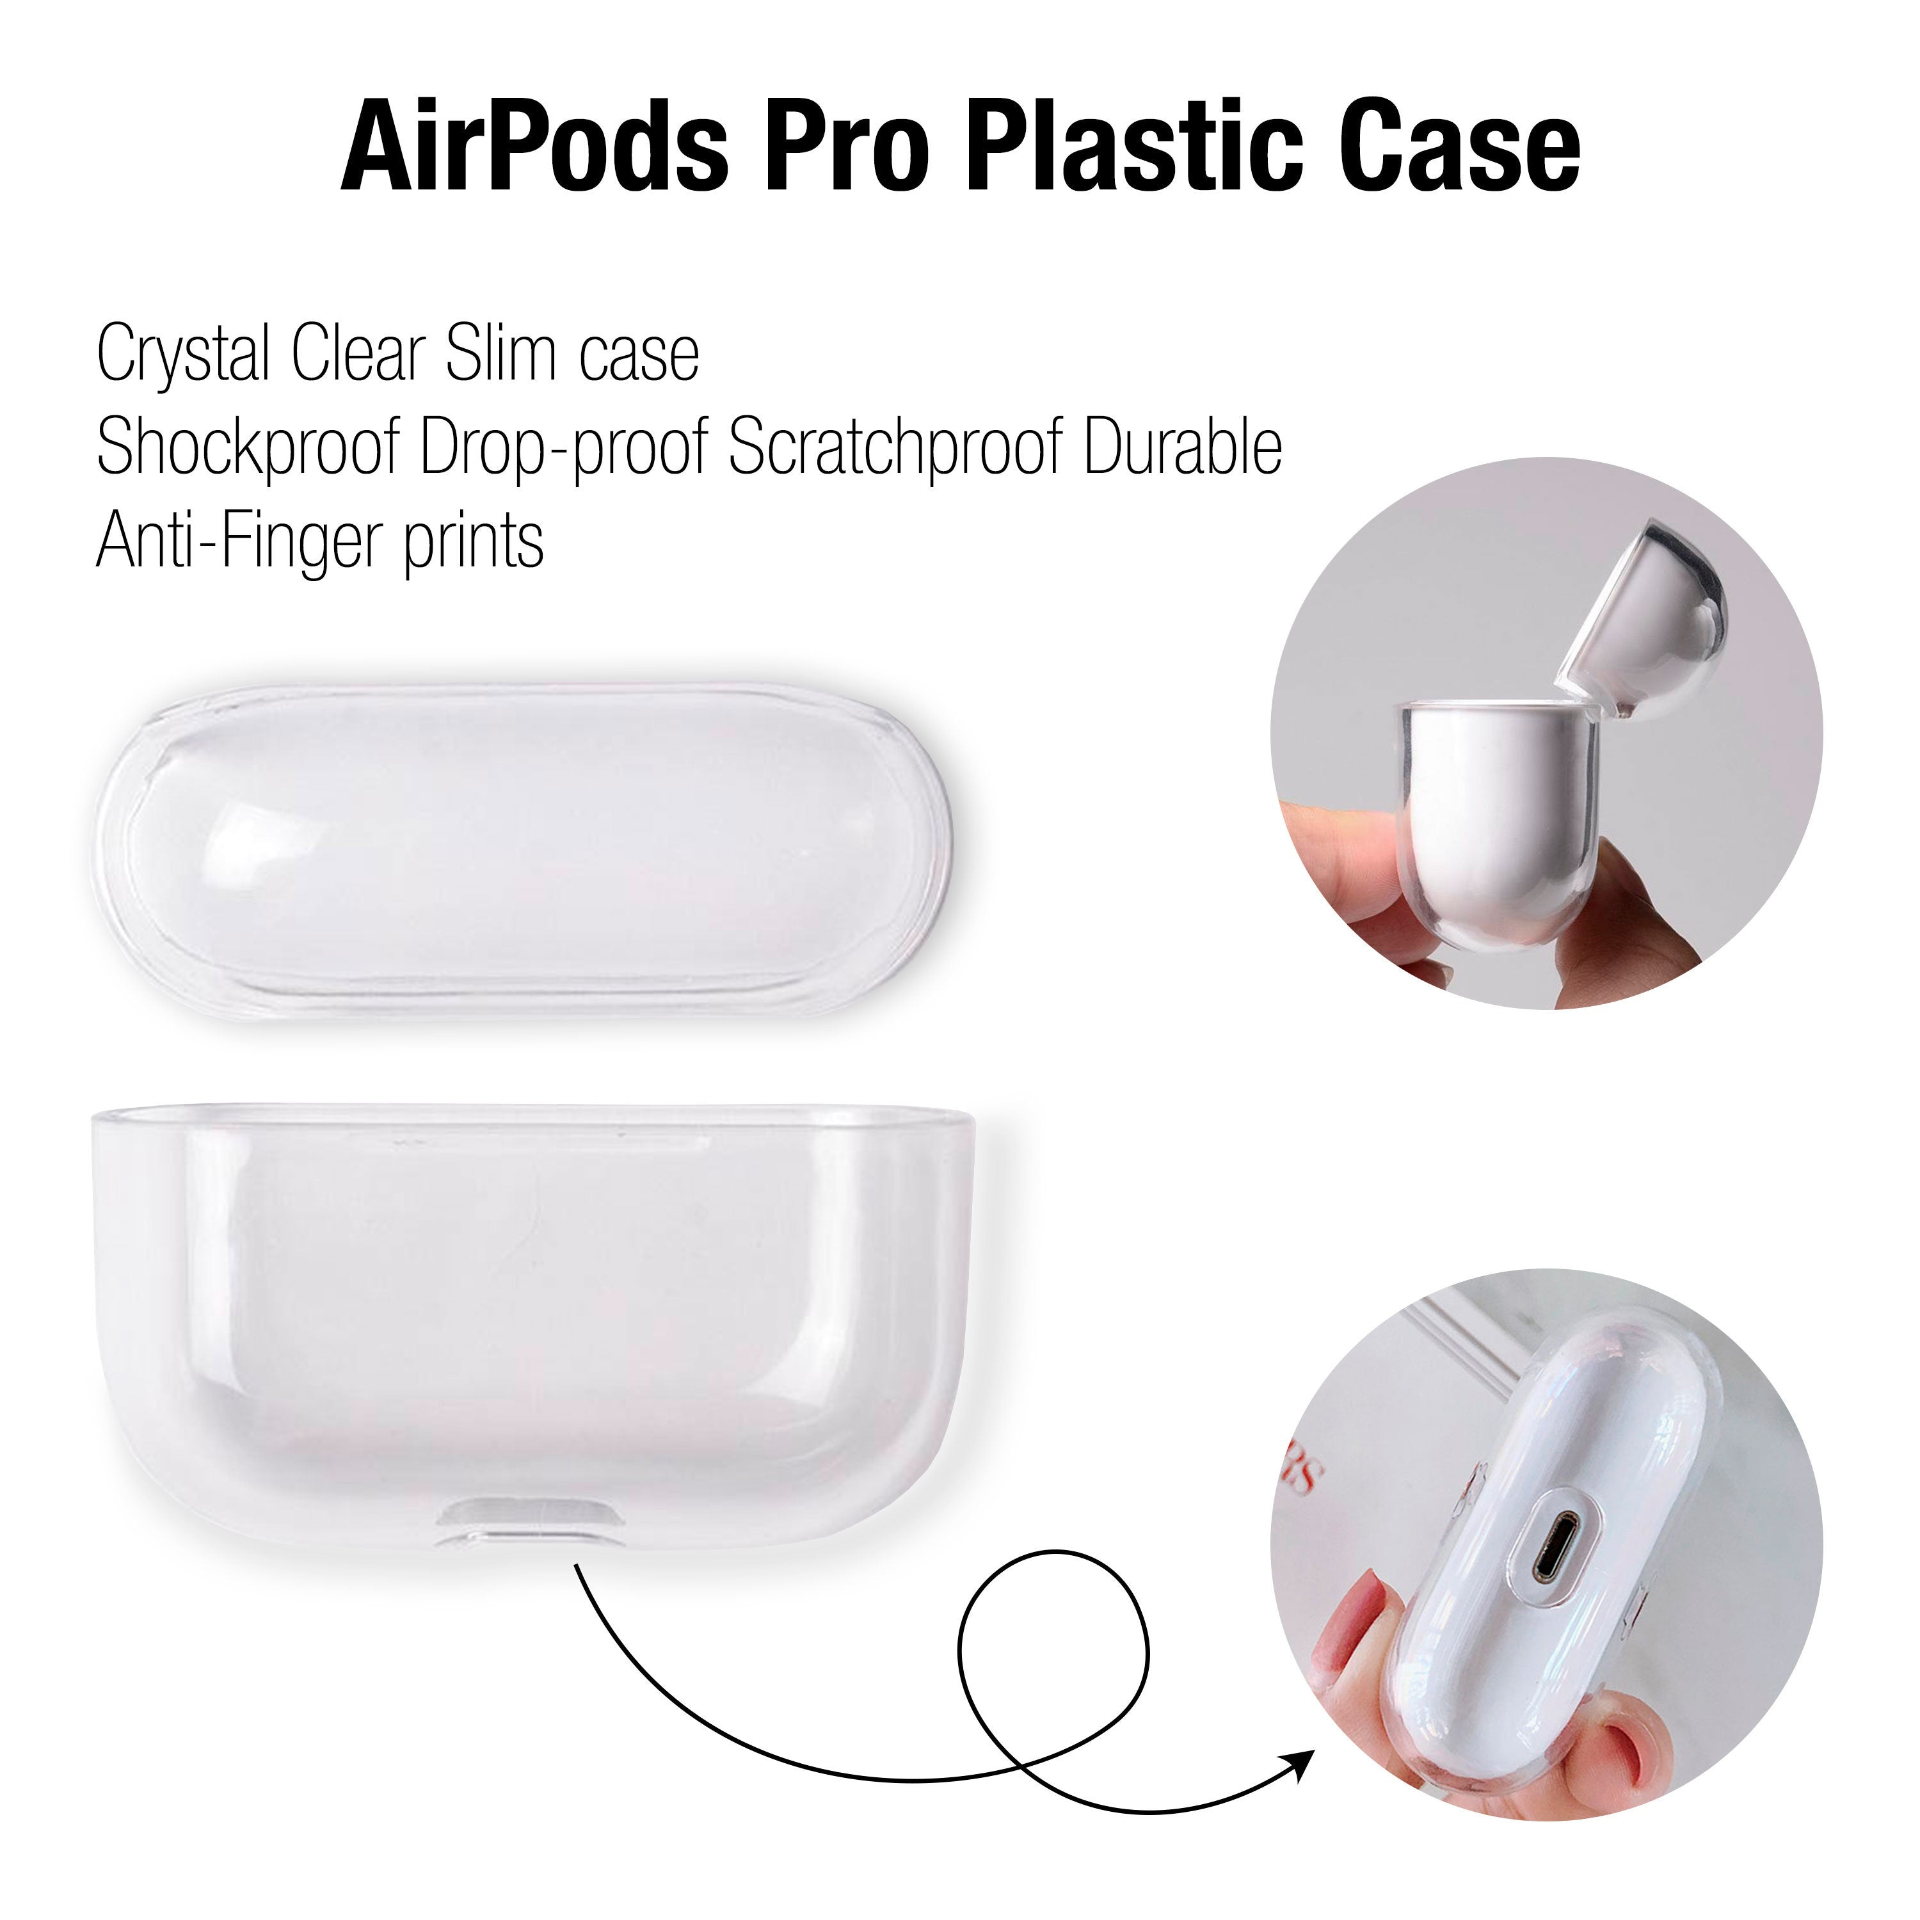 AirPods Plastic Case (YG1370)